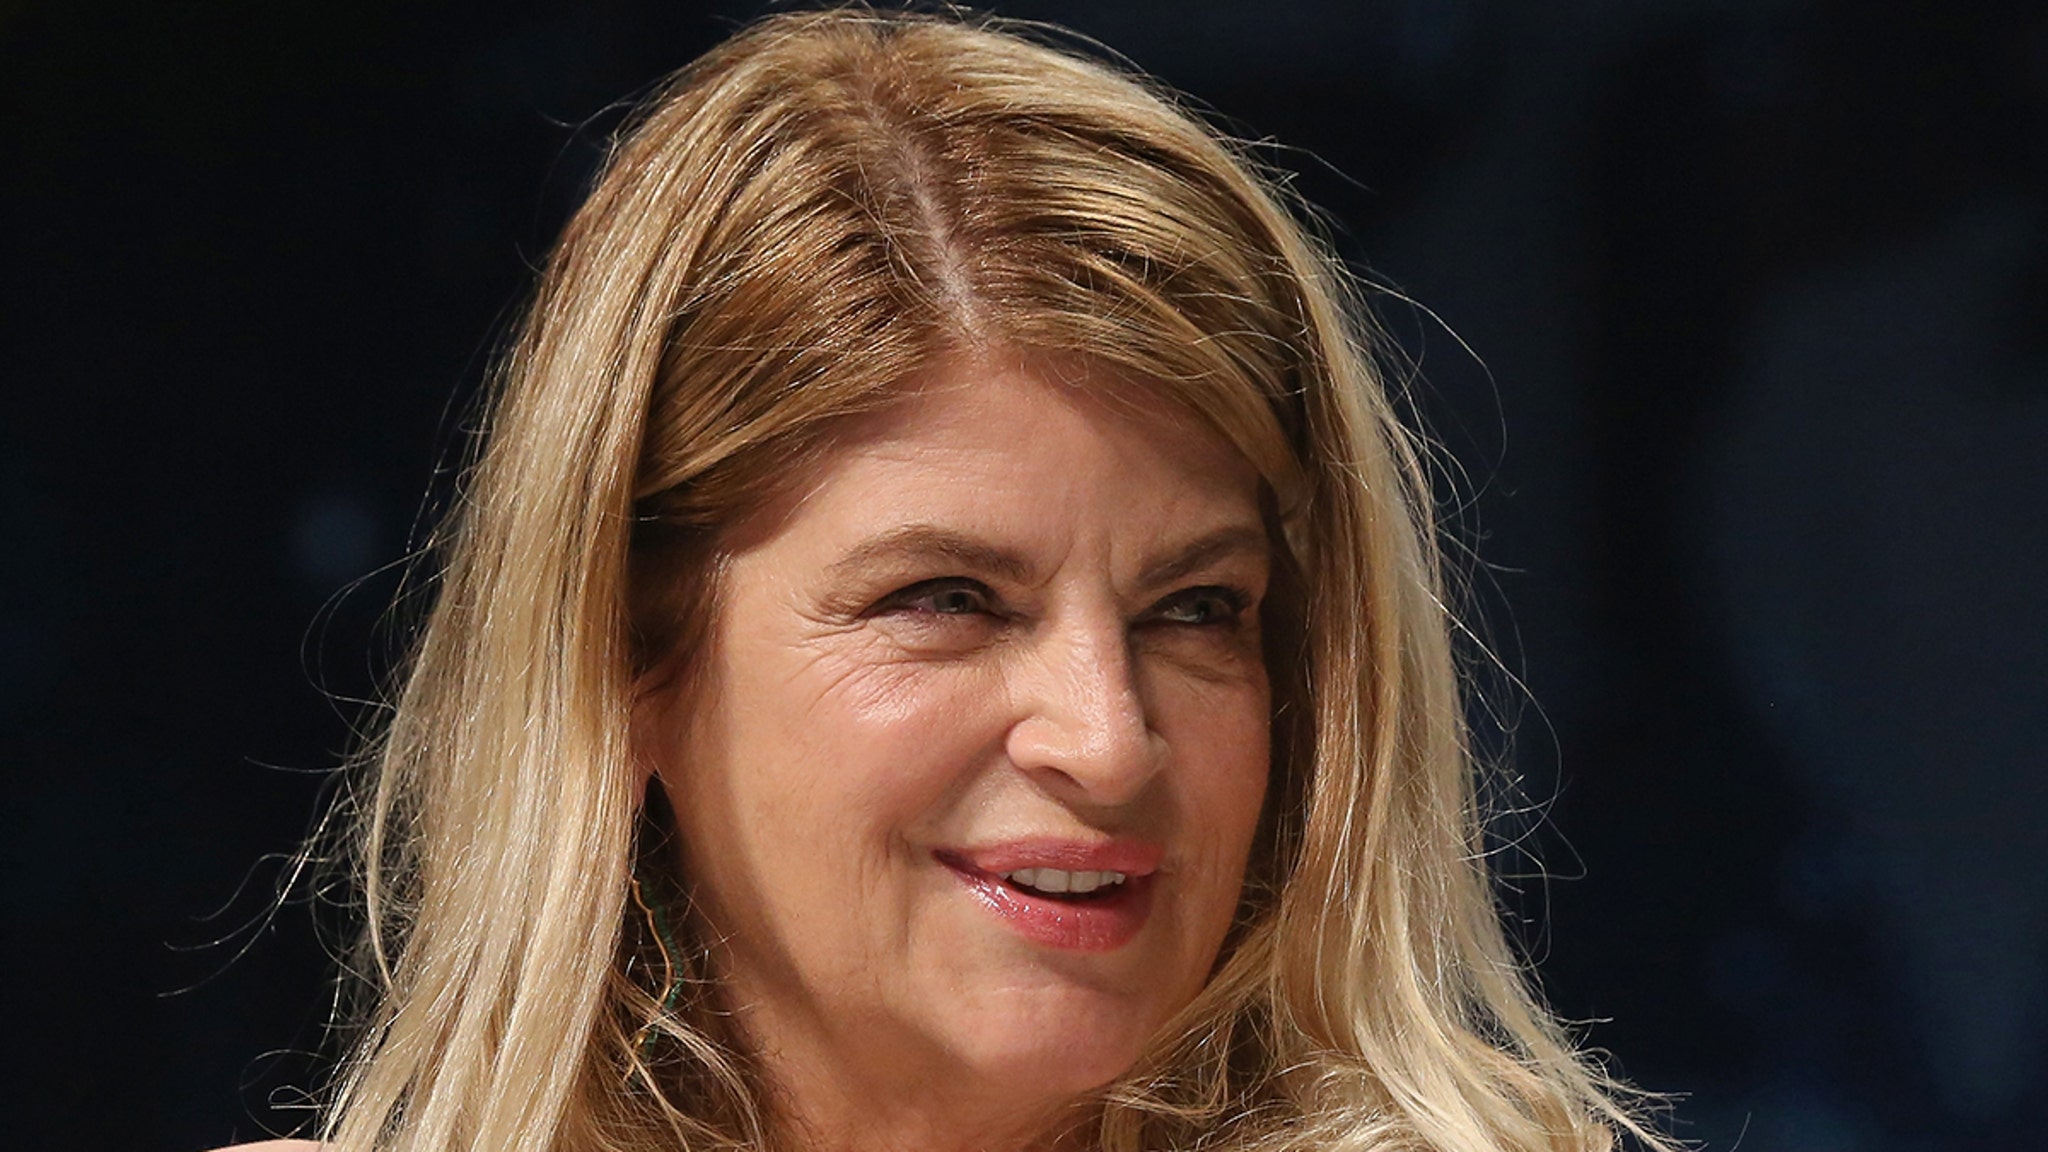 Kirstie Alley Dead at 71 After Private Battle with Cancer